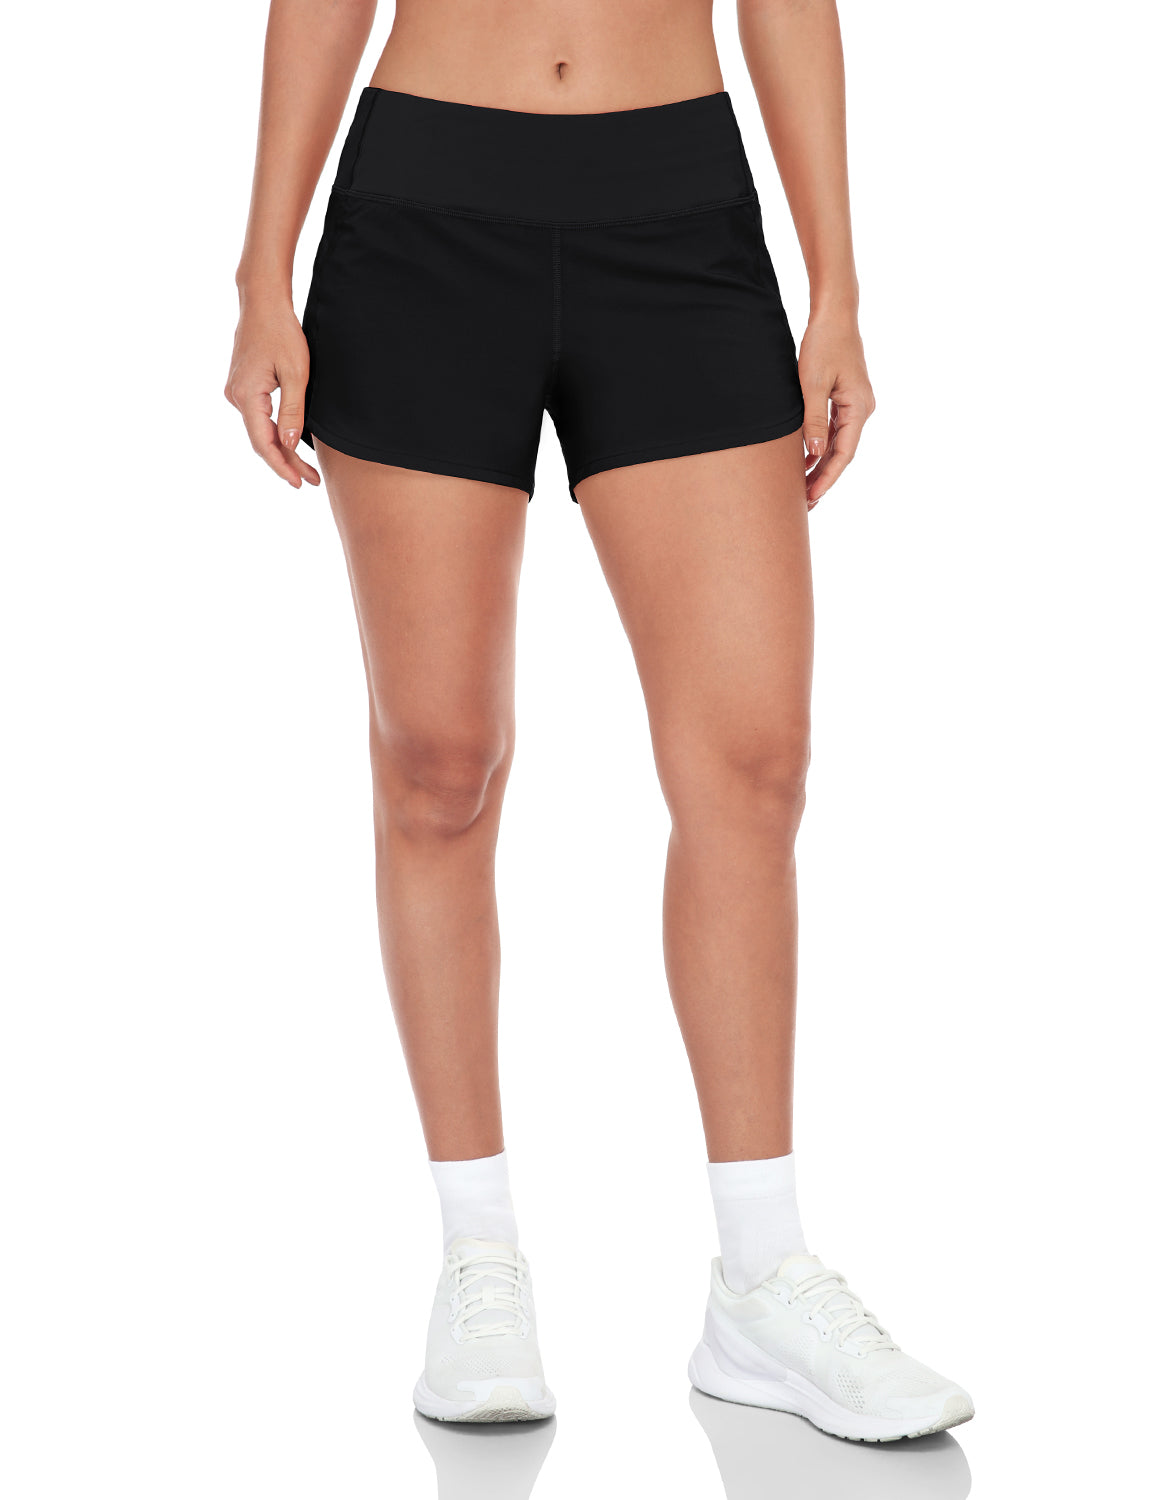 HeyNuts Stride Running Shorts for Women, Mid Waisted Athletic